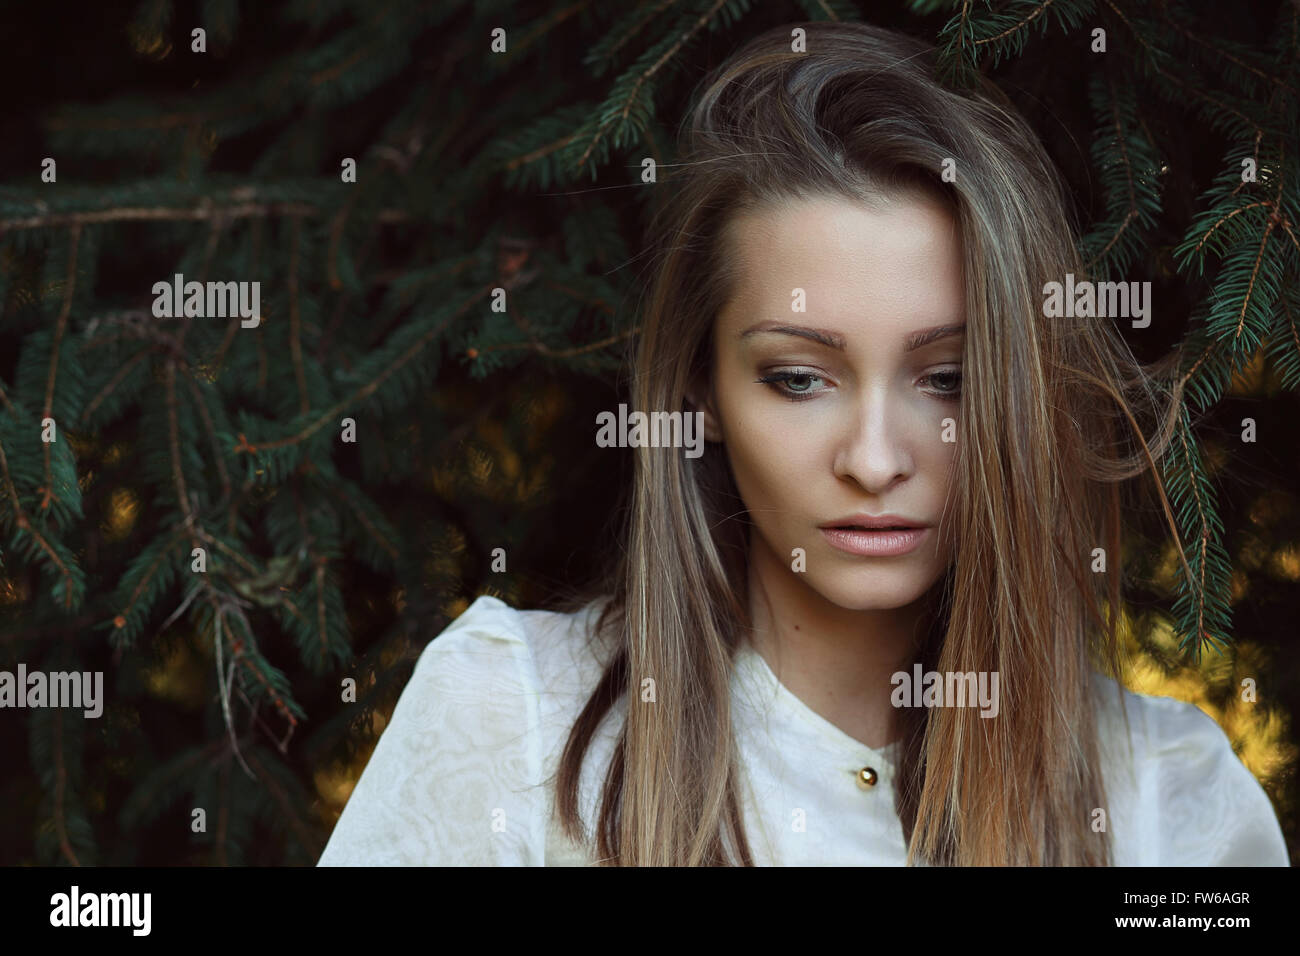 Beautiful young woman lost in her thoughts . Loneliness and melancholy Stock Photo